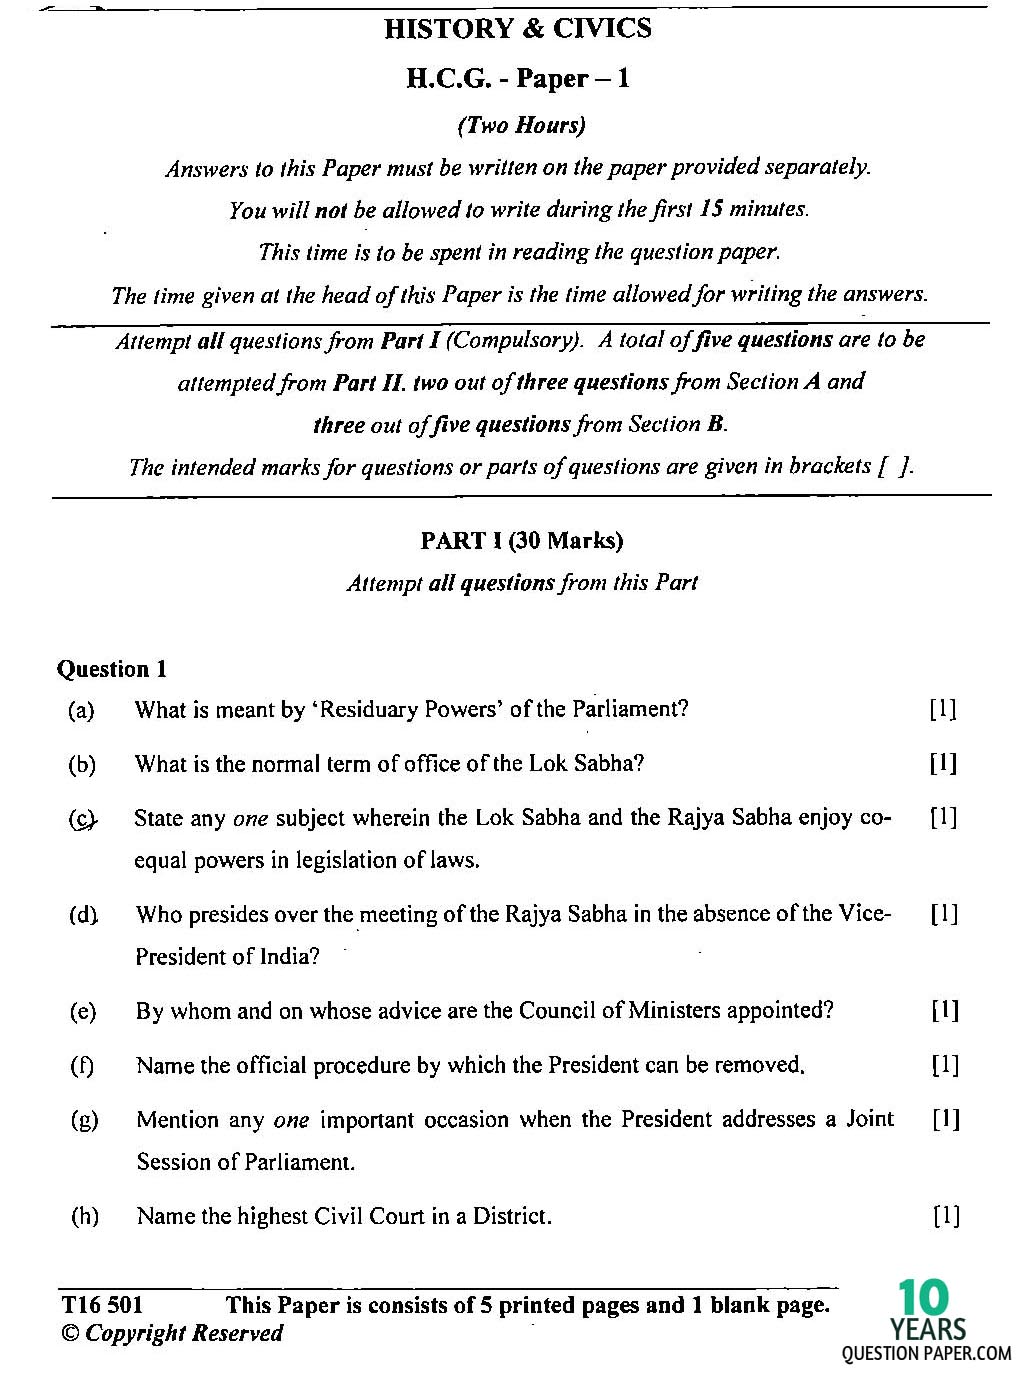 Provisional Tests In Zim Pdf